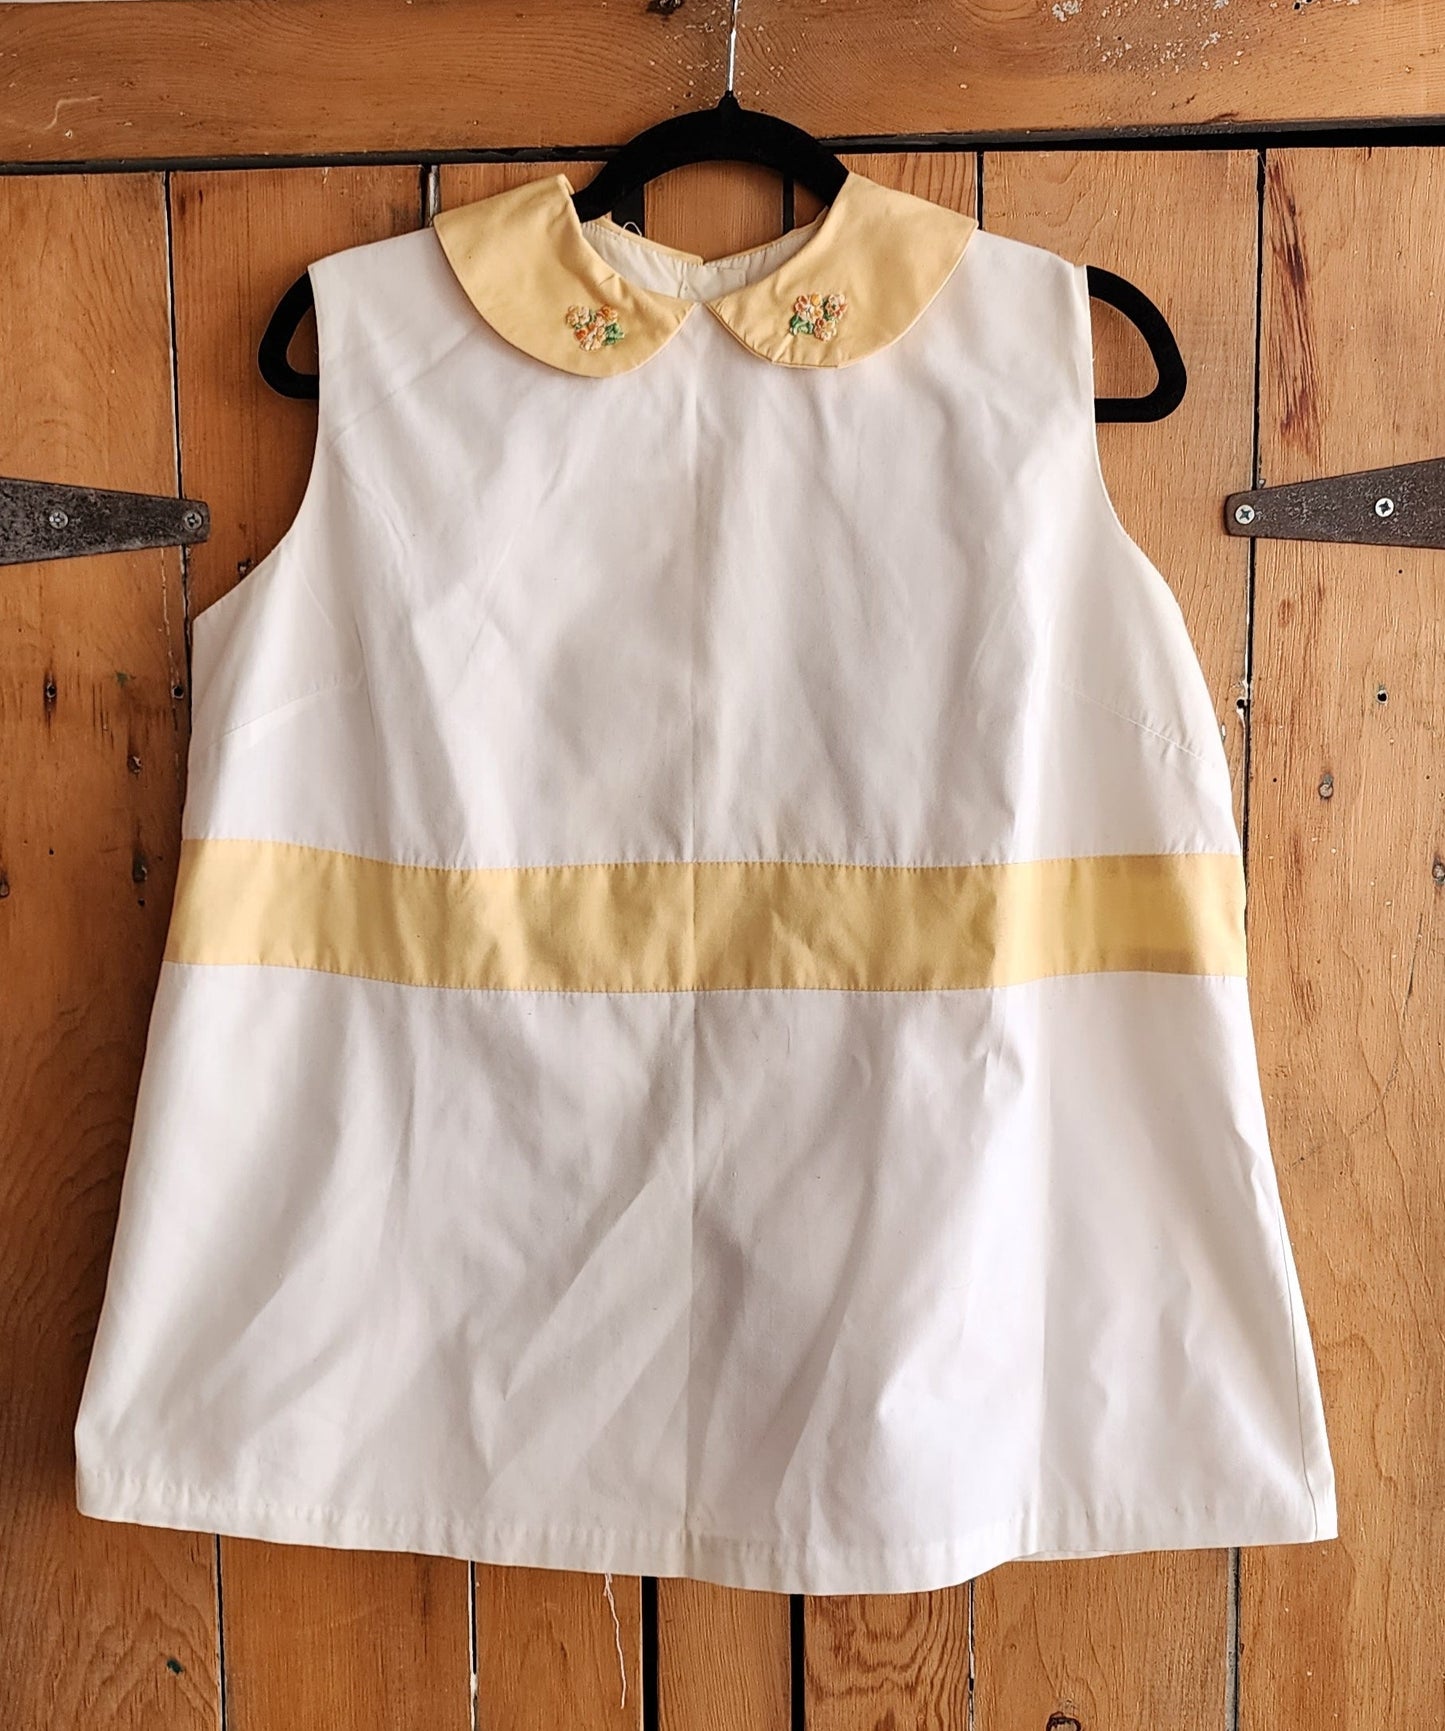 60s Maternity Summer Top White Yellow Cotton Peter Pan Collar